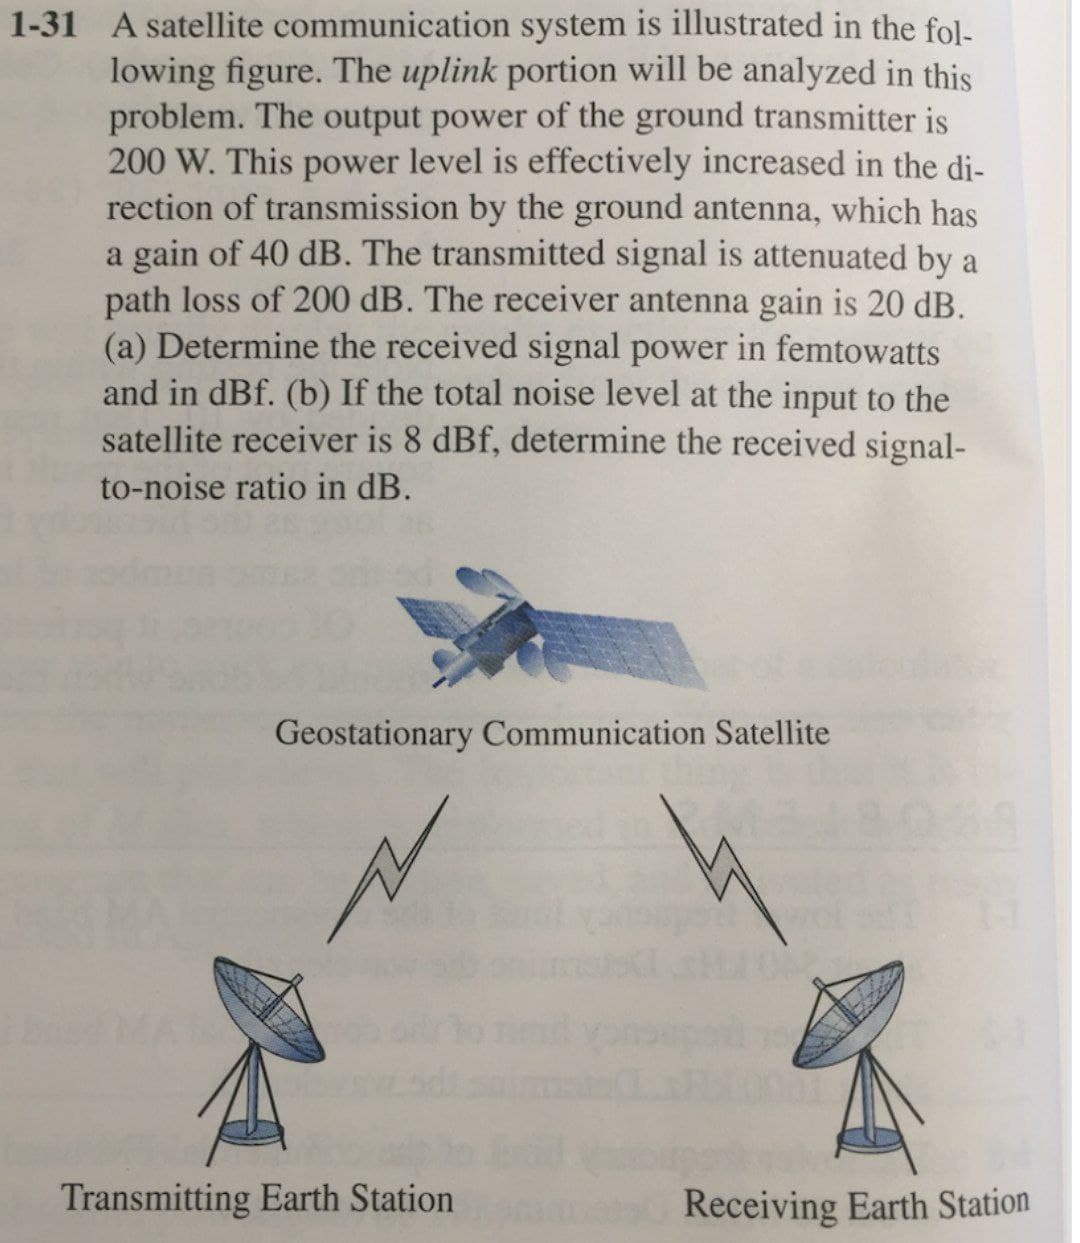 1-31 A satellite communication system is illustrated in the fol-
lowing figure. The uplink portion will be analyzed in this
problem. The output power of the ground transmitter is
200 W. This power level is effectively increased in the di-
rection of transmission by the ground antenna, which has
a gain of 40 dB. The transmitted signal is attenuated by a
path loss of 200 dB. The receiver antenna gain is 20 dB.
(a) Determine the received signal power in femtowatts
and in dBf. (b) If the total noise level at the input to the
satellite receiver is 8 dBf, determine the received signal-
to-noise ratio in dB.
Geostationary Communication Satellite
Transmitting Earth Station
421
Receiving Earth Station